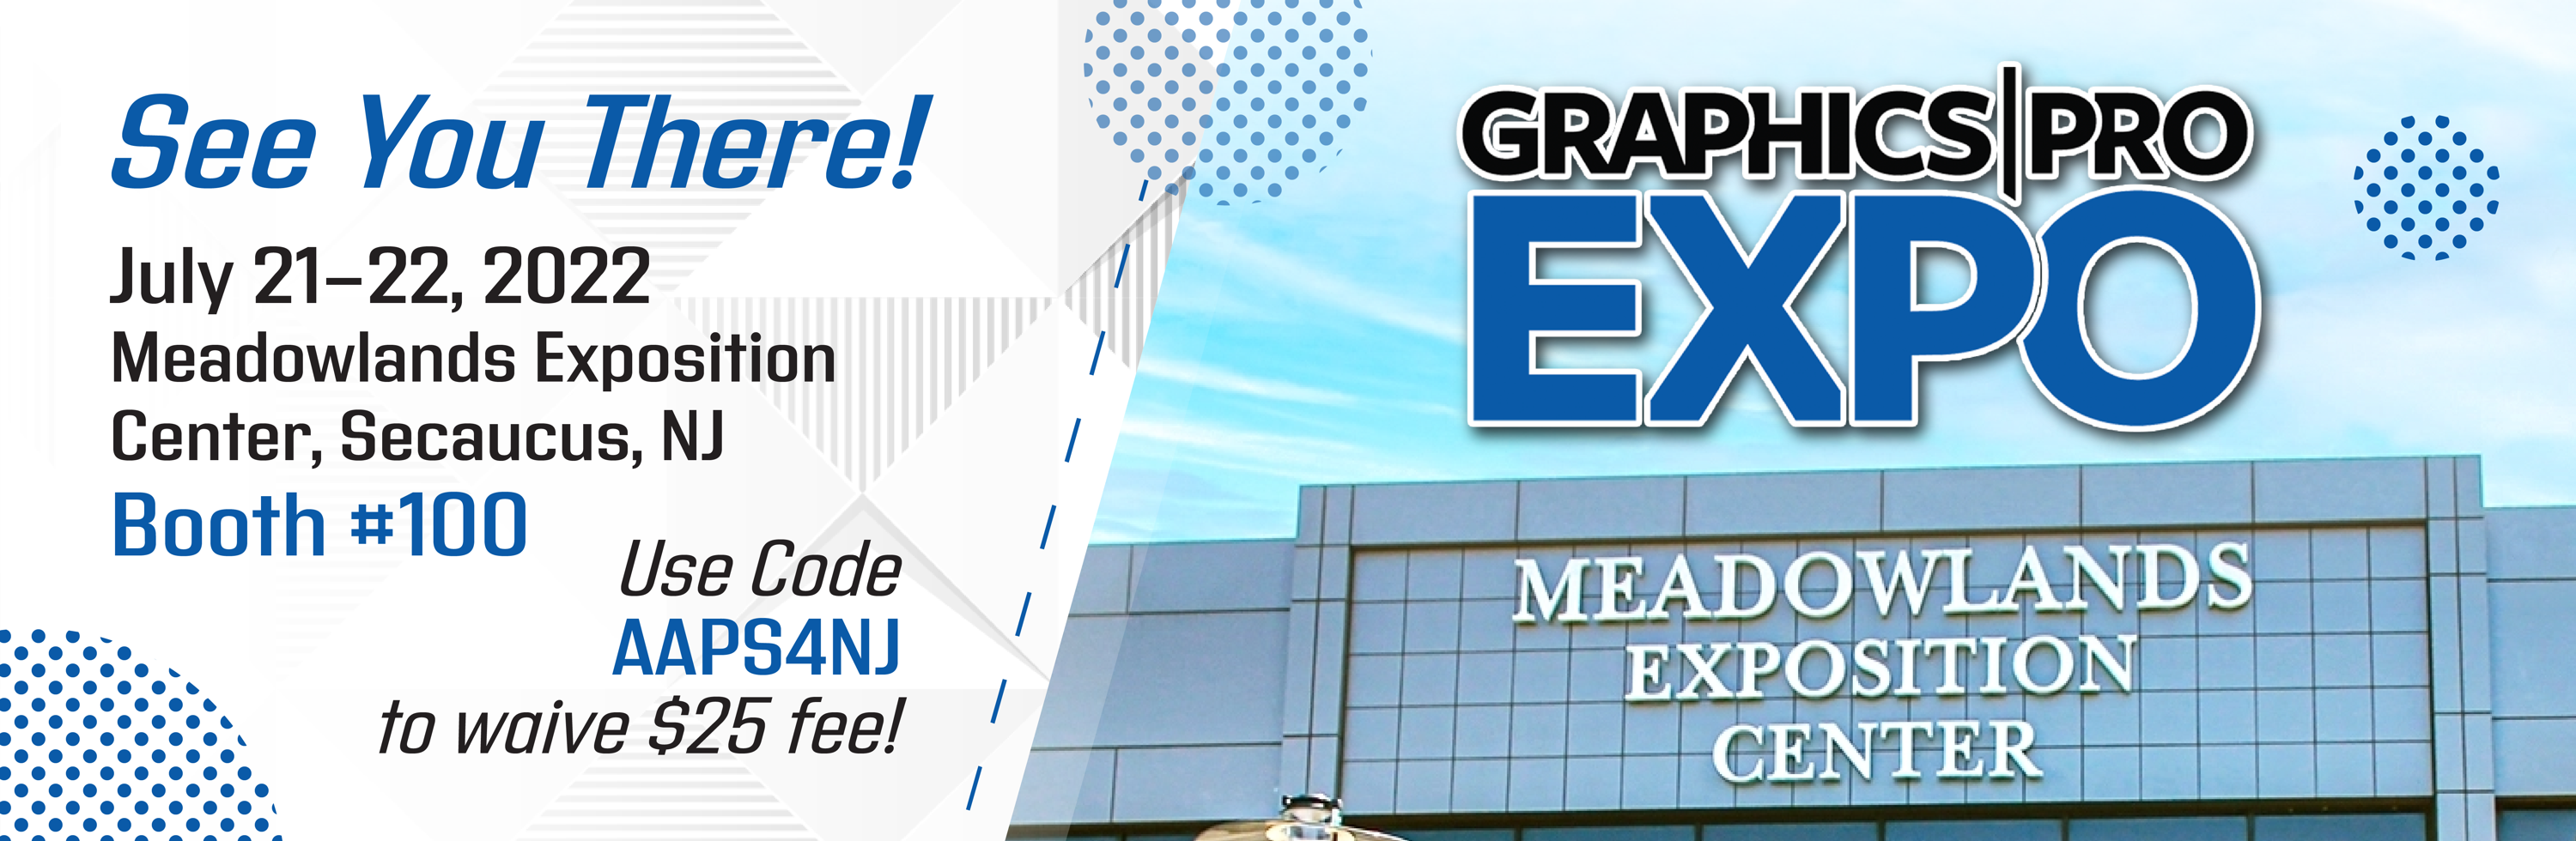 Graphics Pro Expo at Meadowlands Exposition Center, Secaucus, New Jersey on July 21-22, 2022. All American Print Supply Co. will be at Booth #100. Use code AAPS4NJ during registration to waive the $25 fee! See you there!